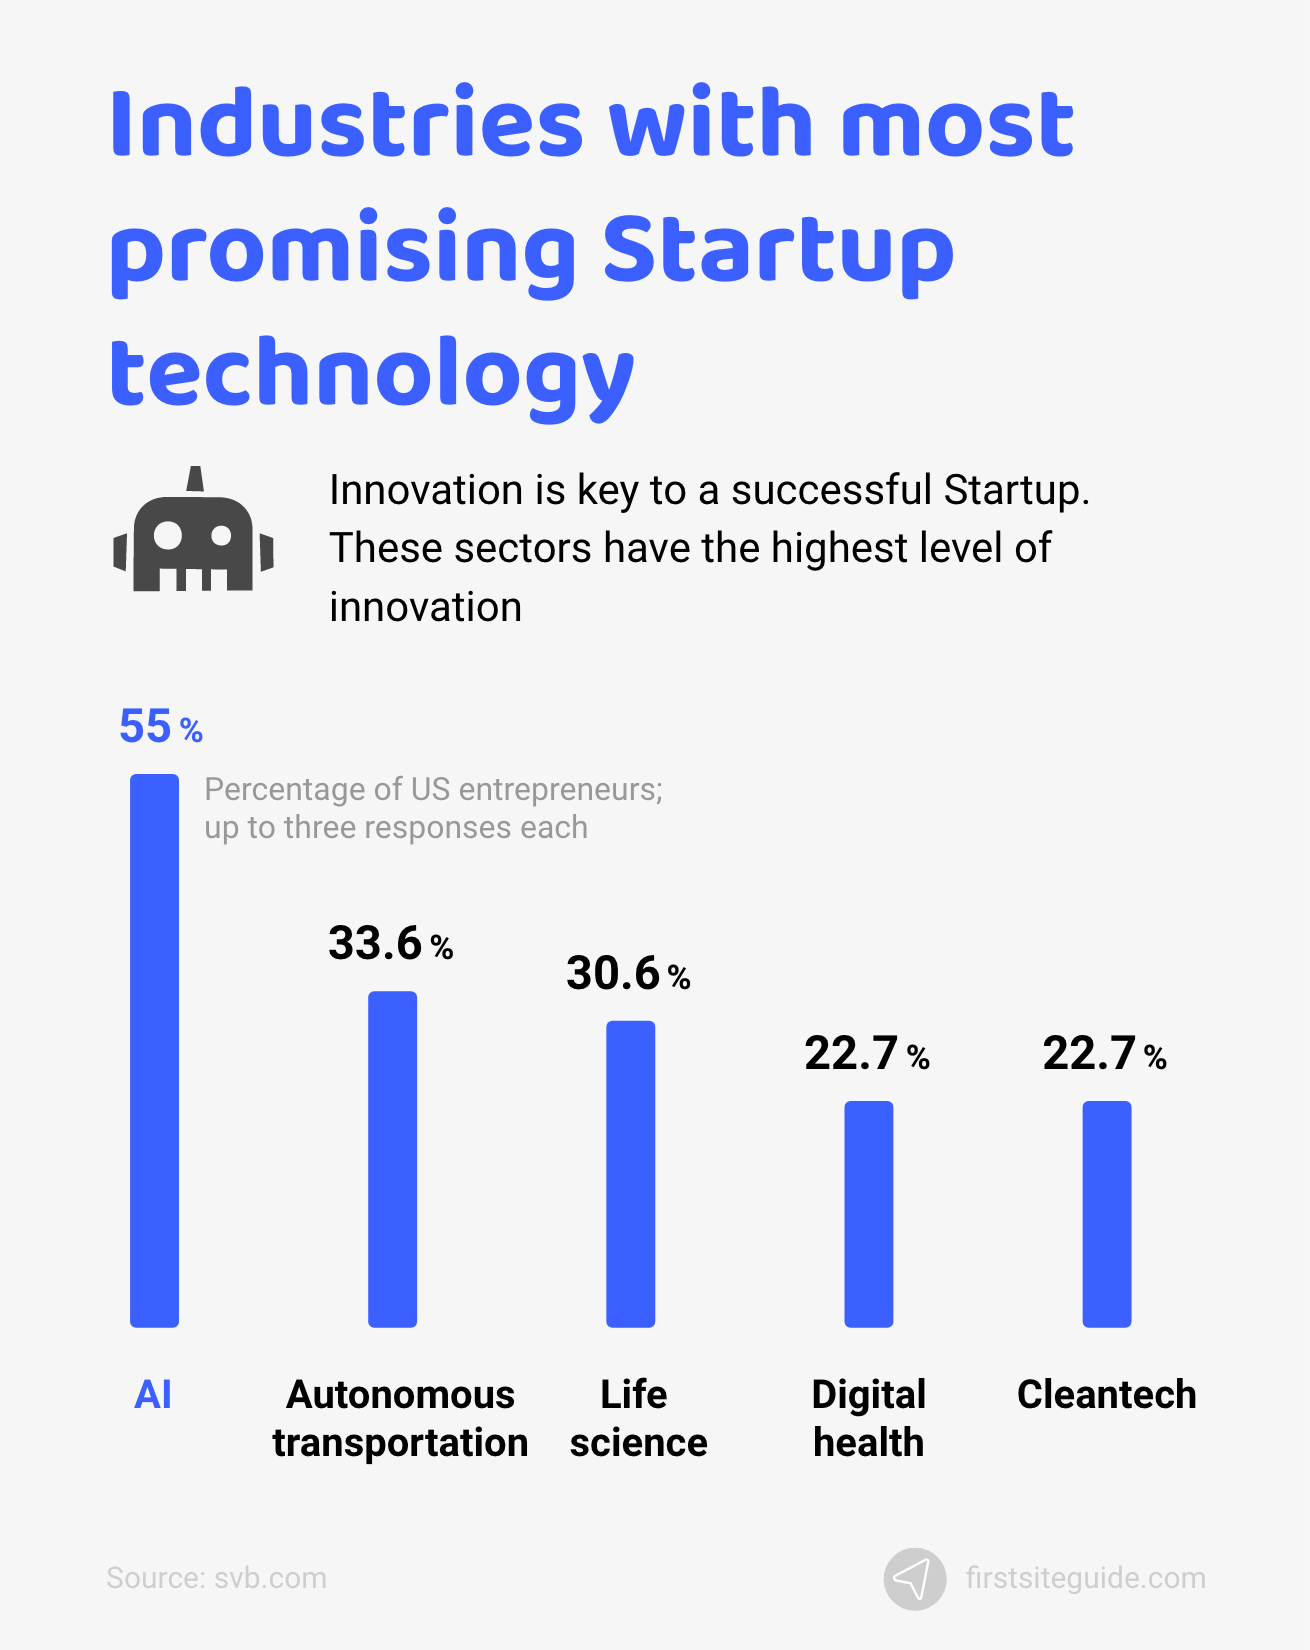 Industries with most promising Startup technology